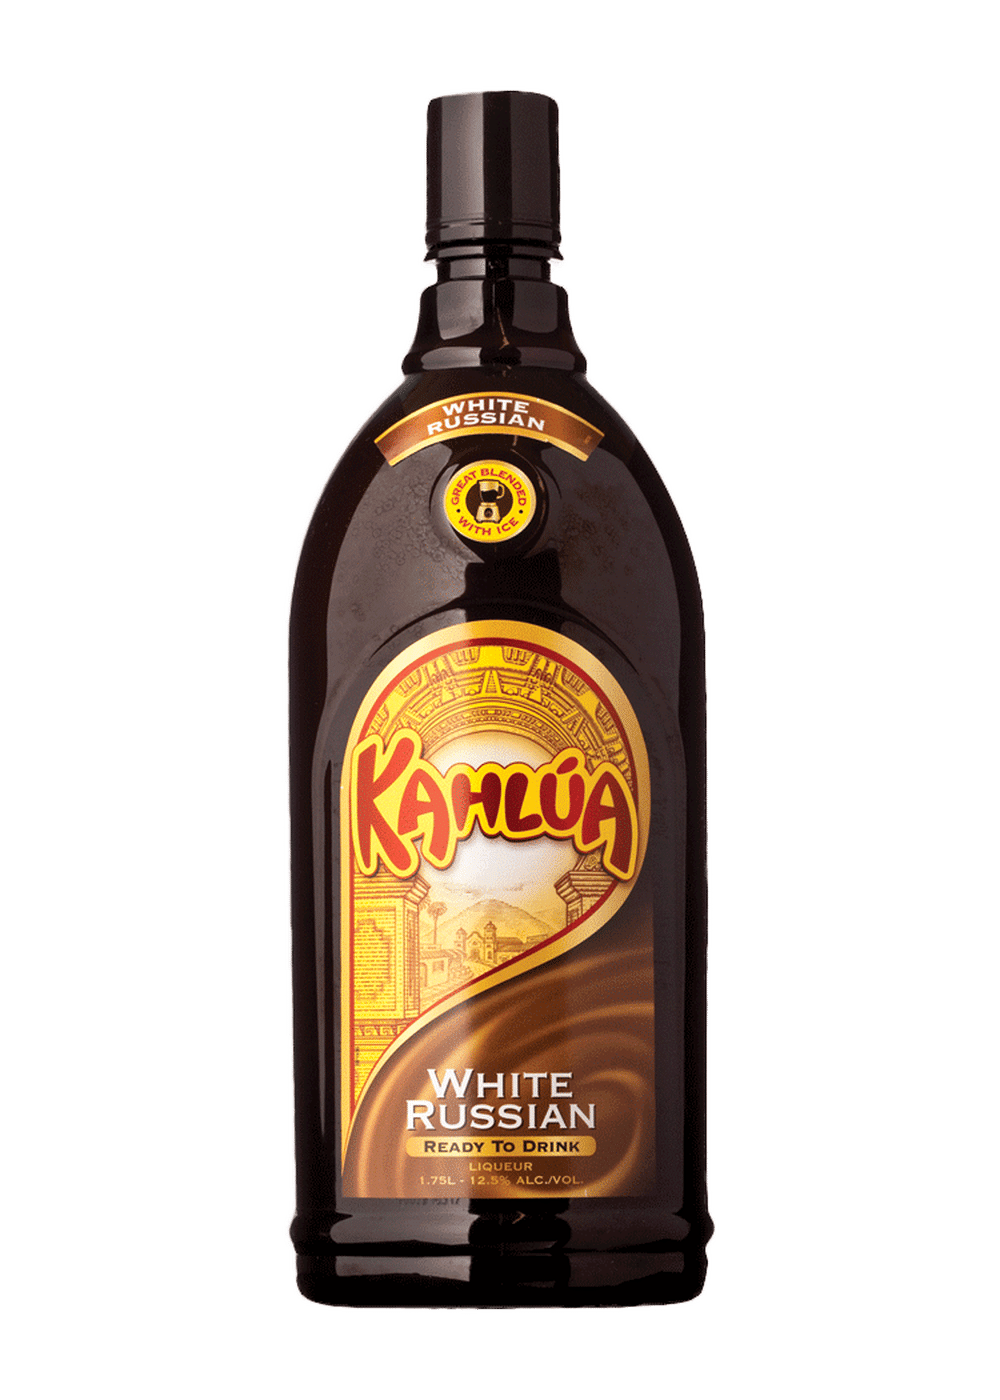 [BUY] Kahlua White Russian (RECOMMENDED) at CaskCartel.com